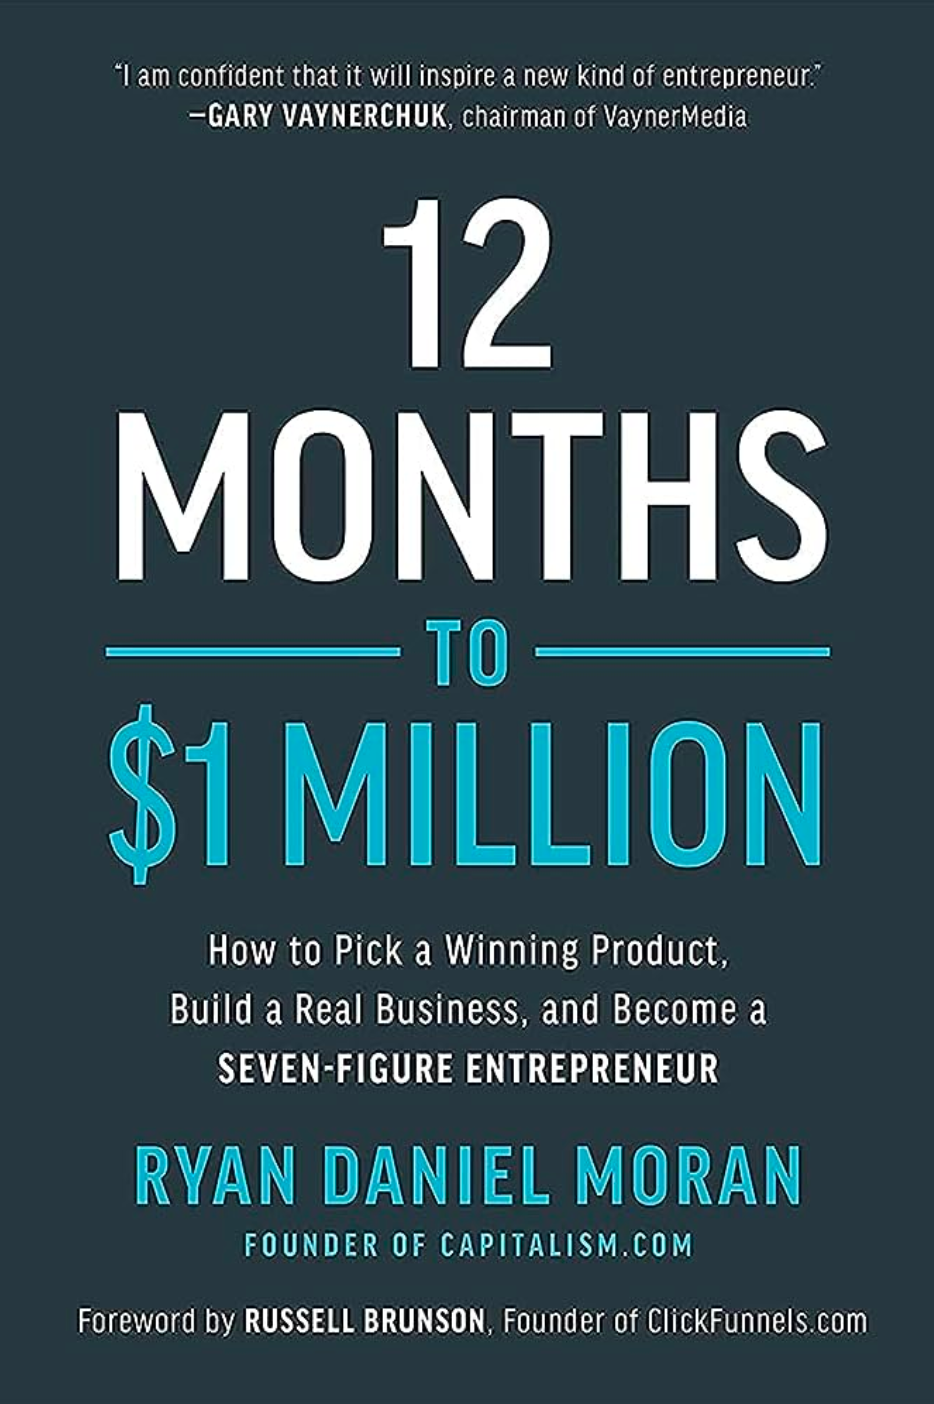 12 Months to $1 Million book cover